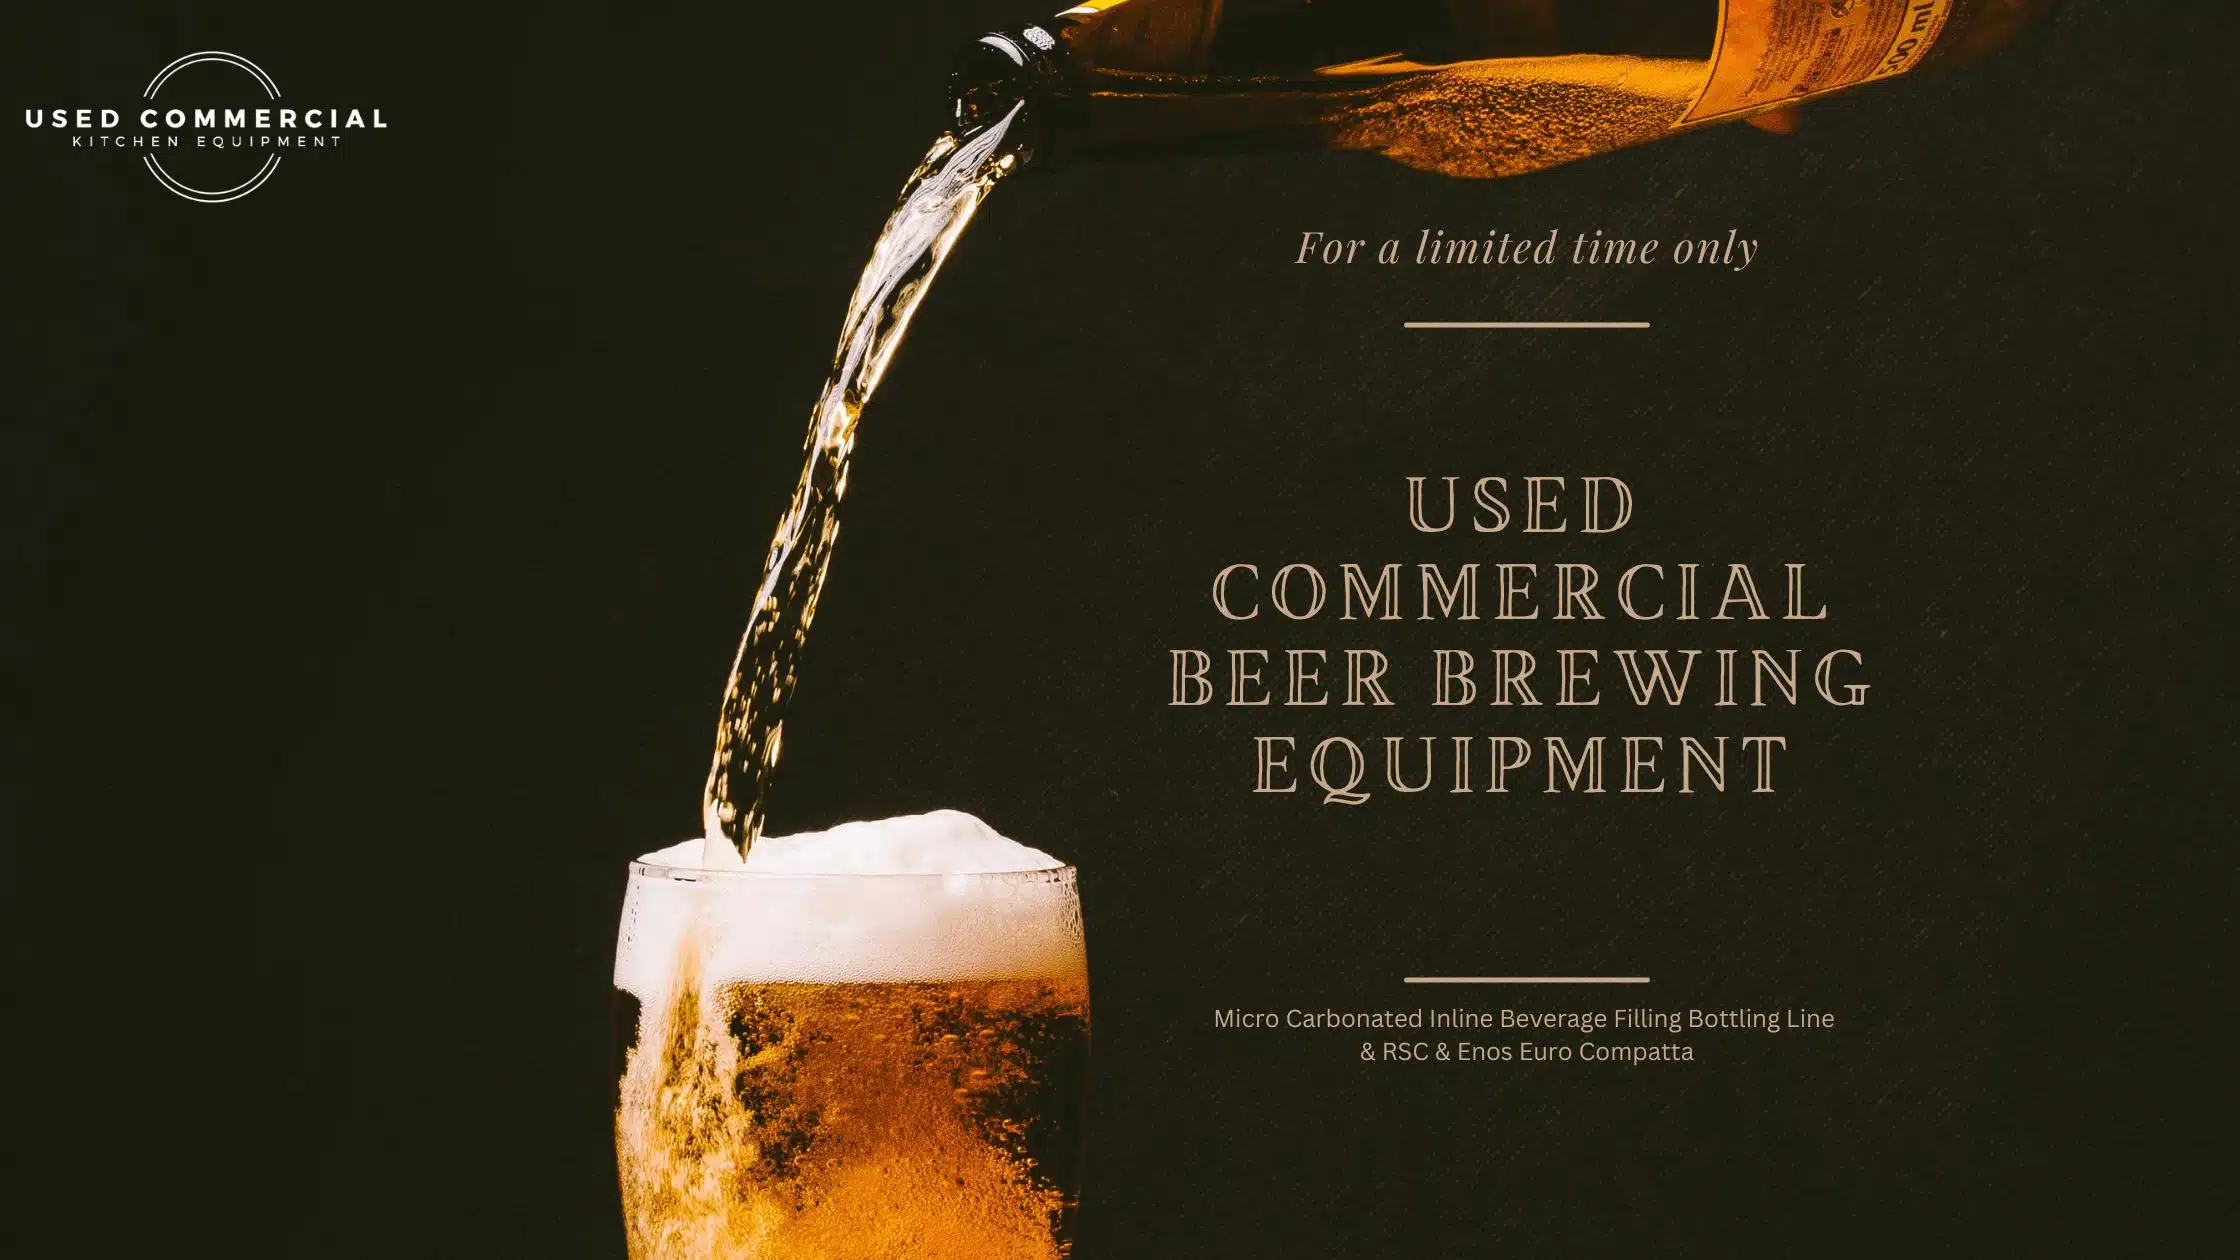 Used Commercial Beer Brewing Equipment